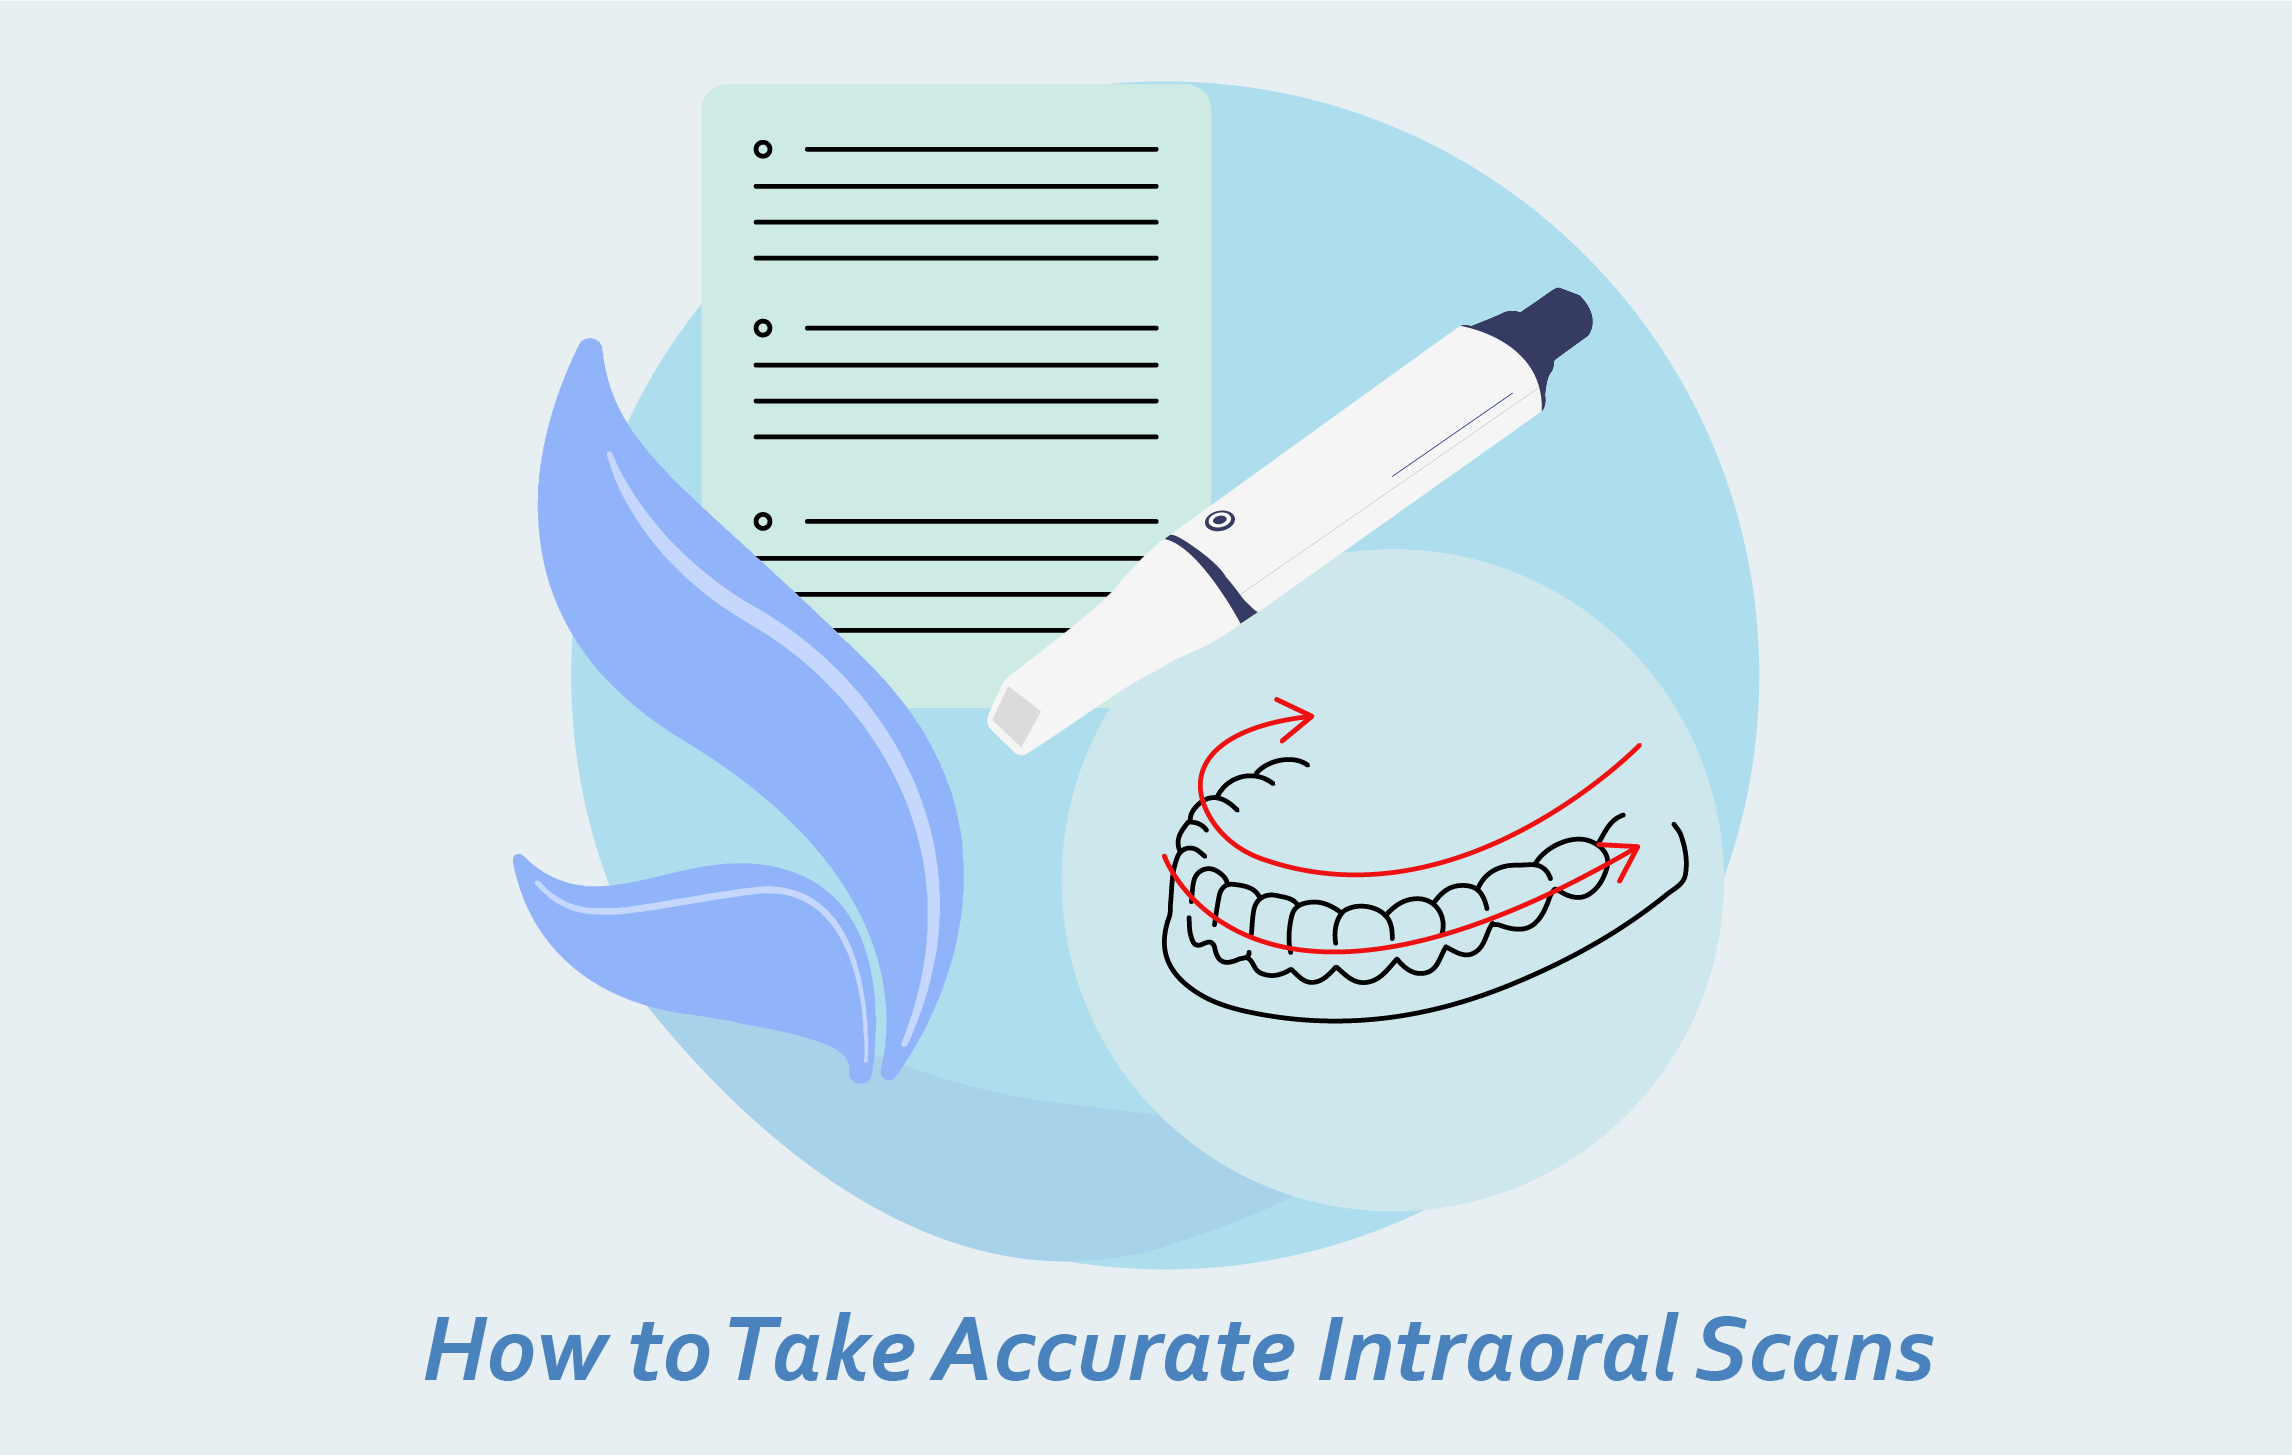 How to Take Accurate Intraoral Scans